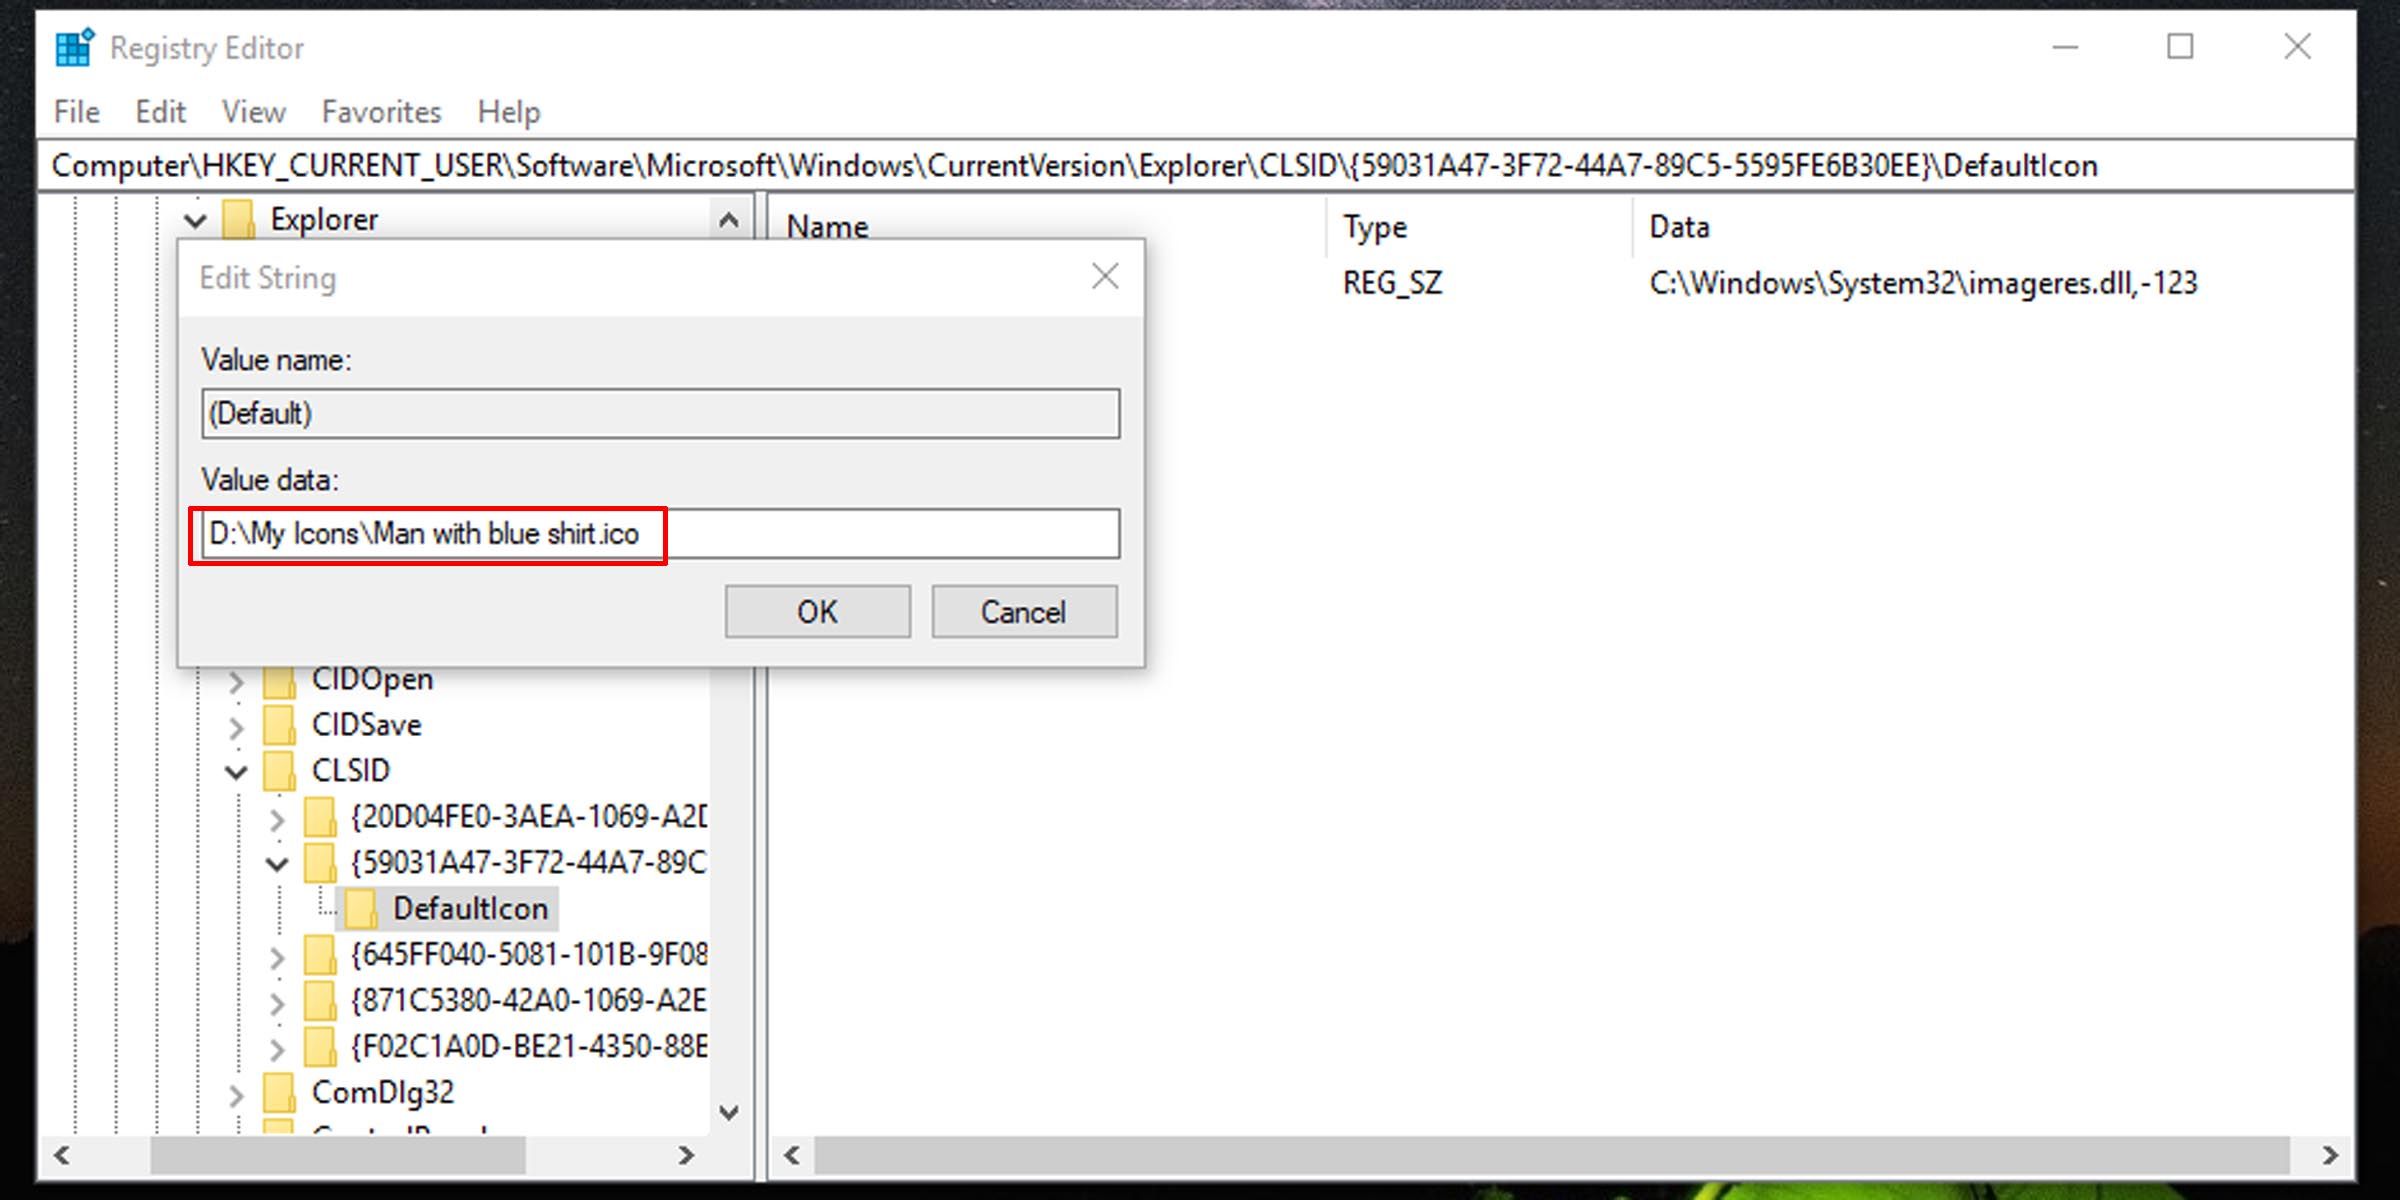 Changing user file value data